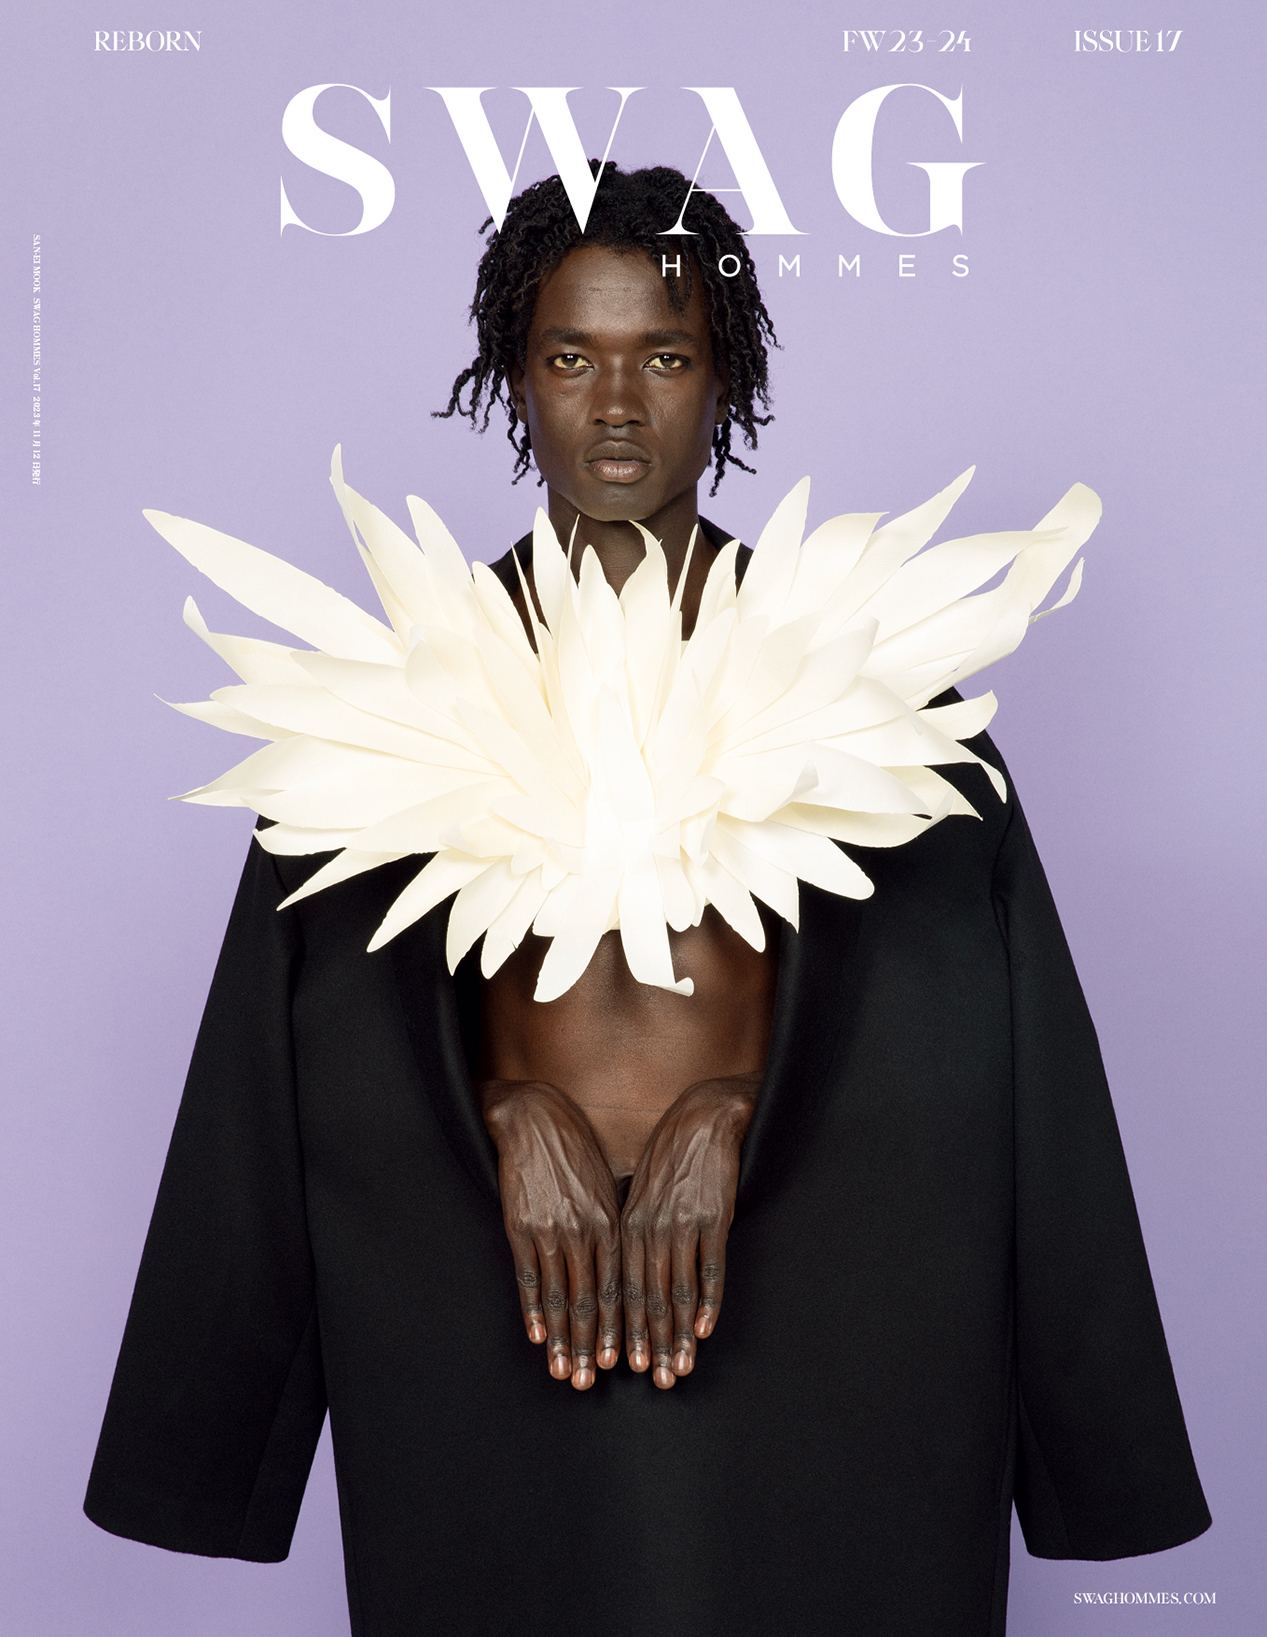 SWAG HOMMES MAGAZINE ISSUE17 FW23-24 | SWAG HOMMES